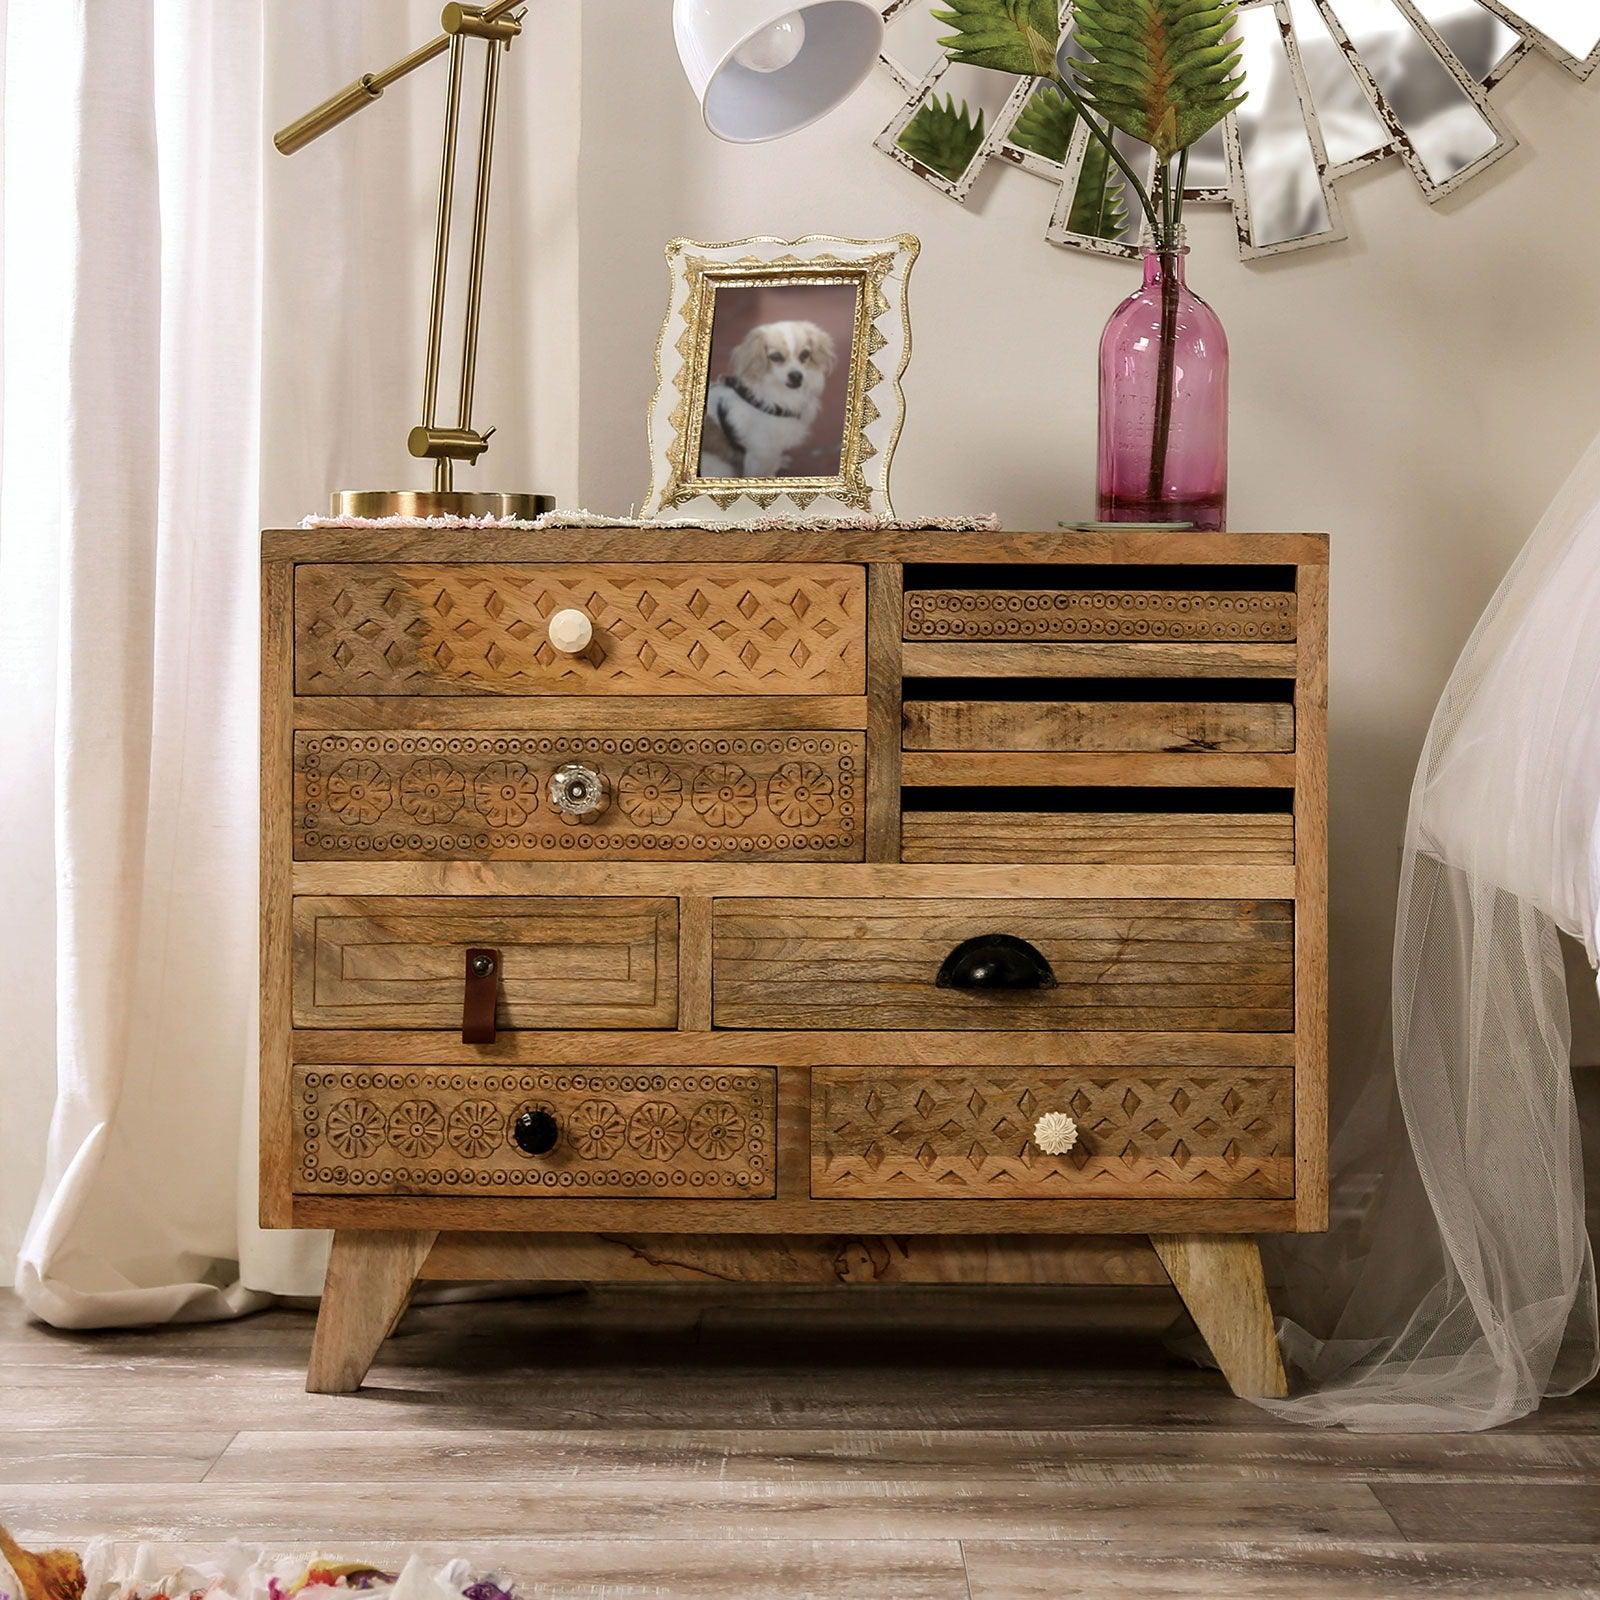 Furniture of America - Blanchefleur - 9 Drawers Chest - Weathered Light Natural Tone - Wood - 5th Avenue Furniture